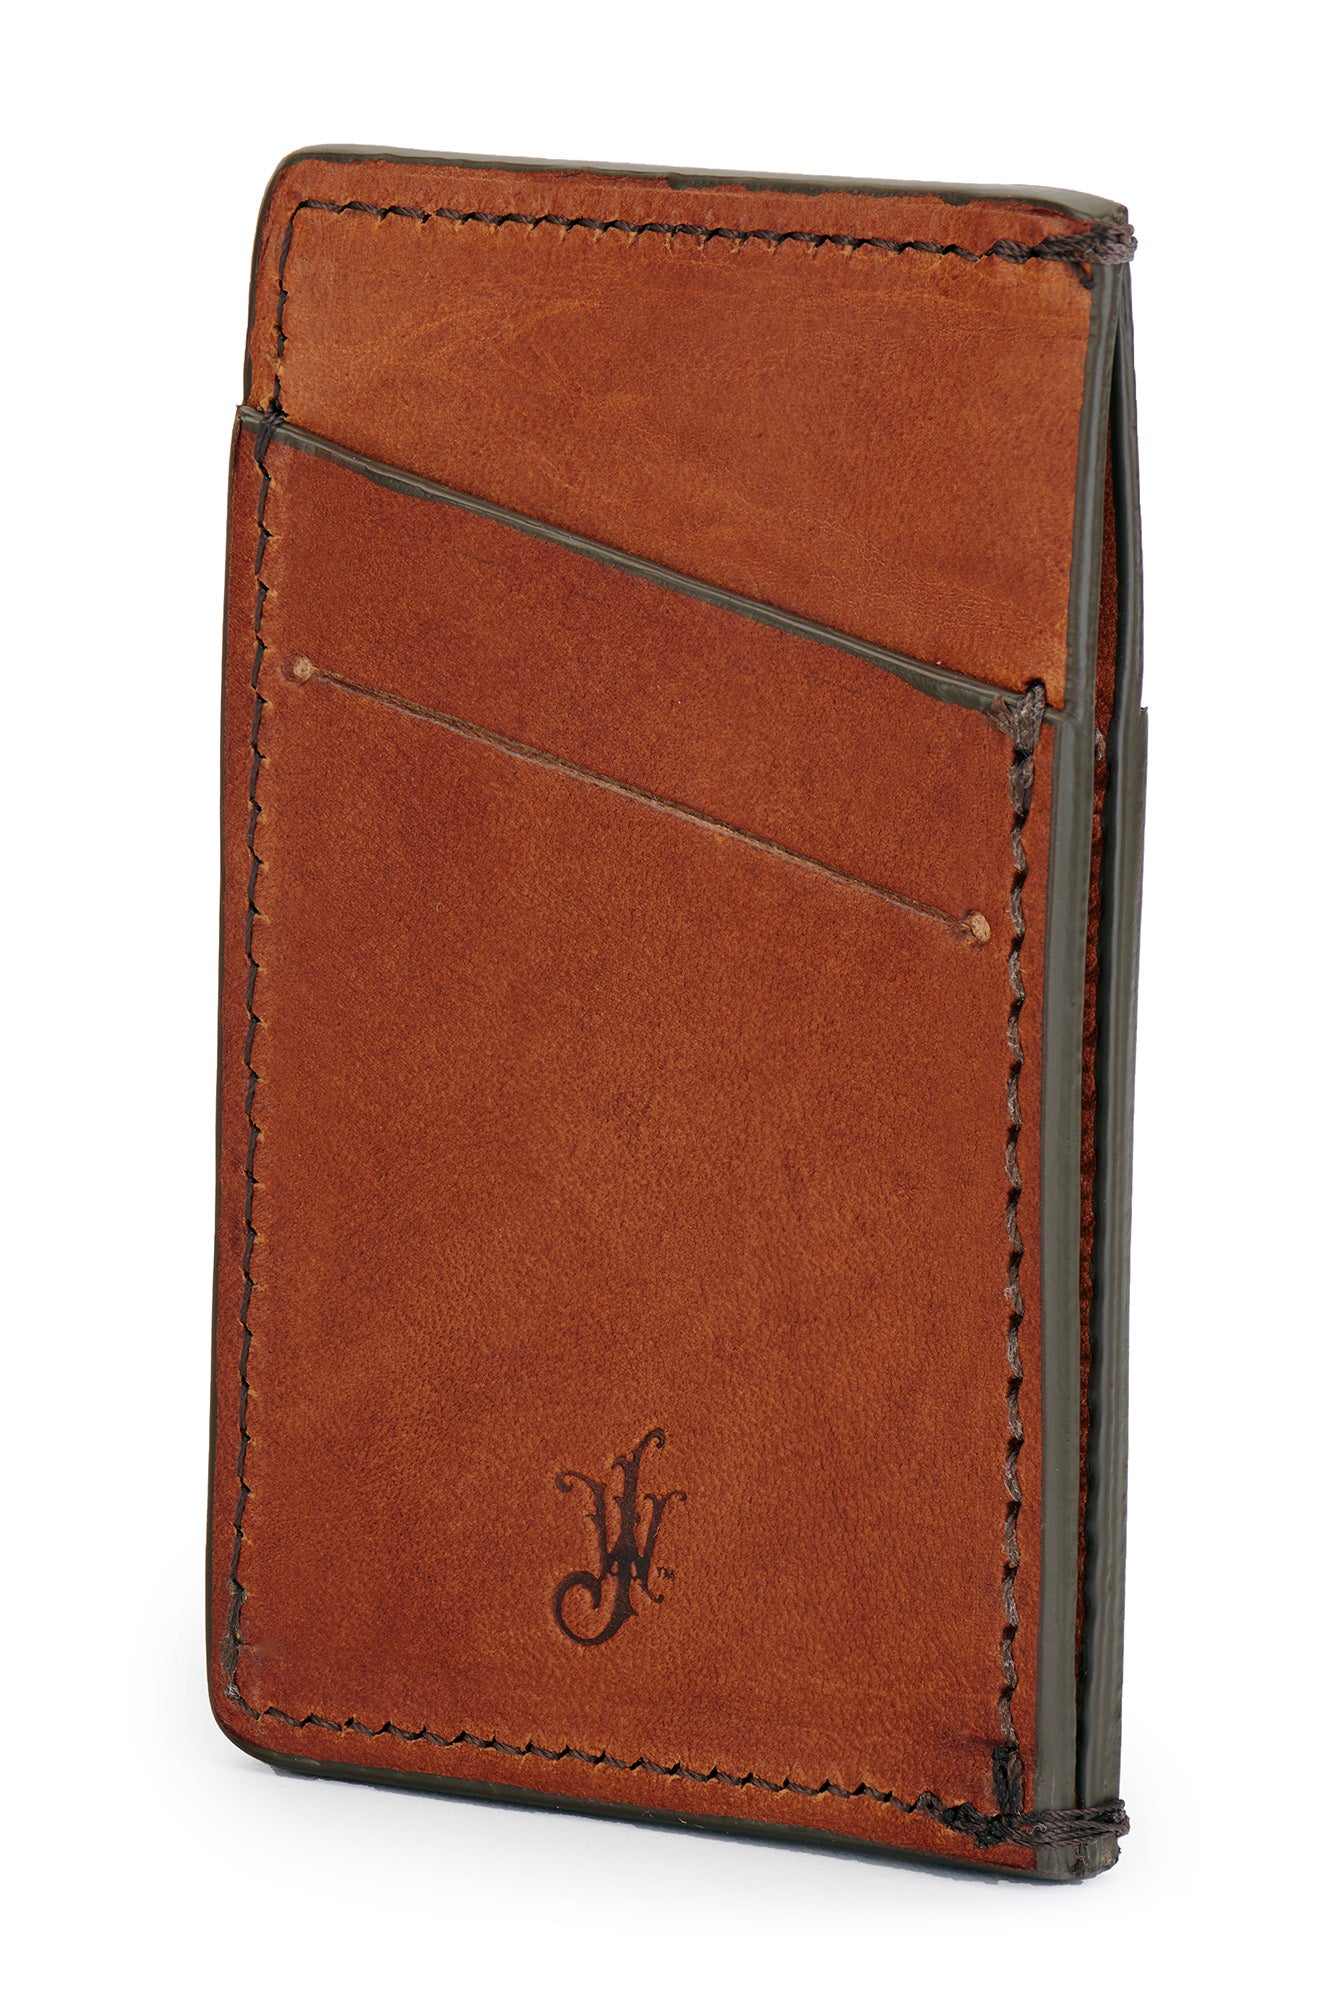 full grain leather minimalist wallet back angle empty pictured in saddle tan